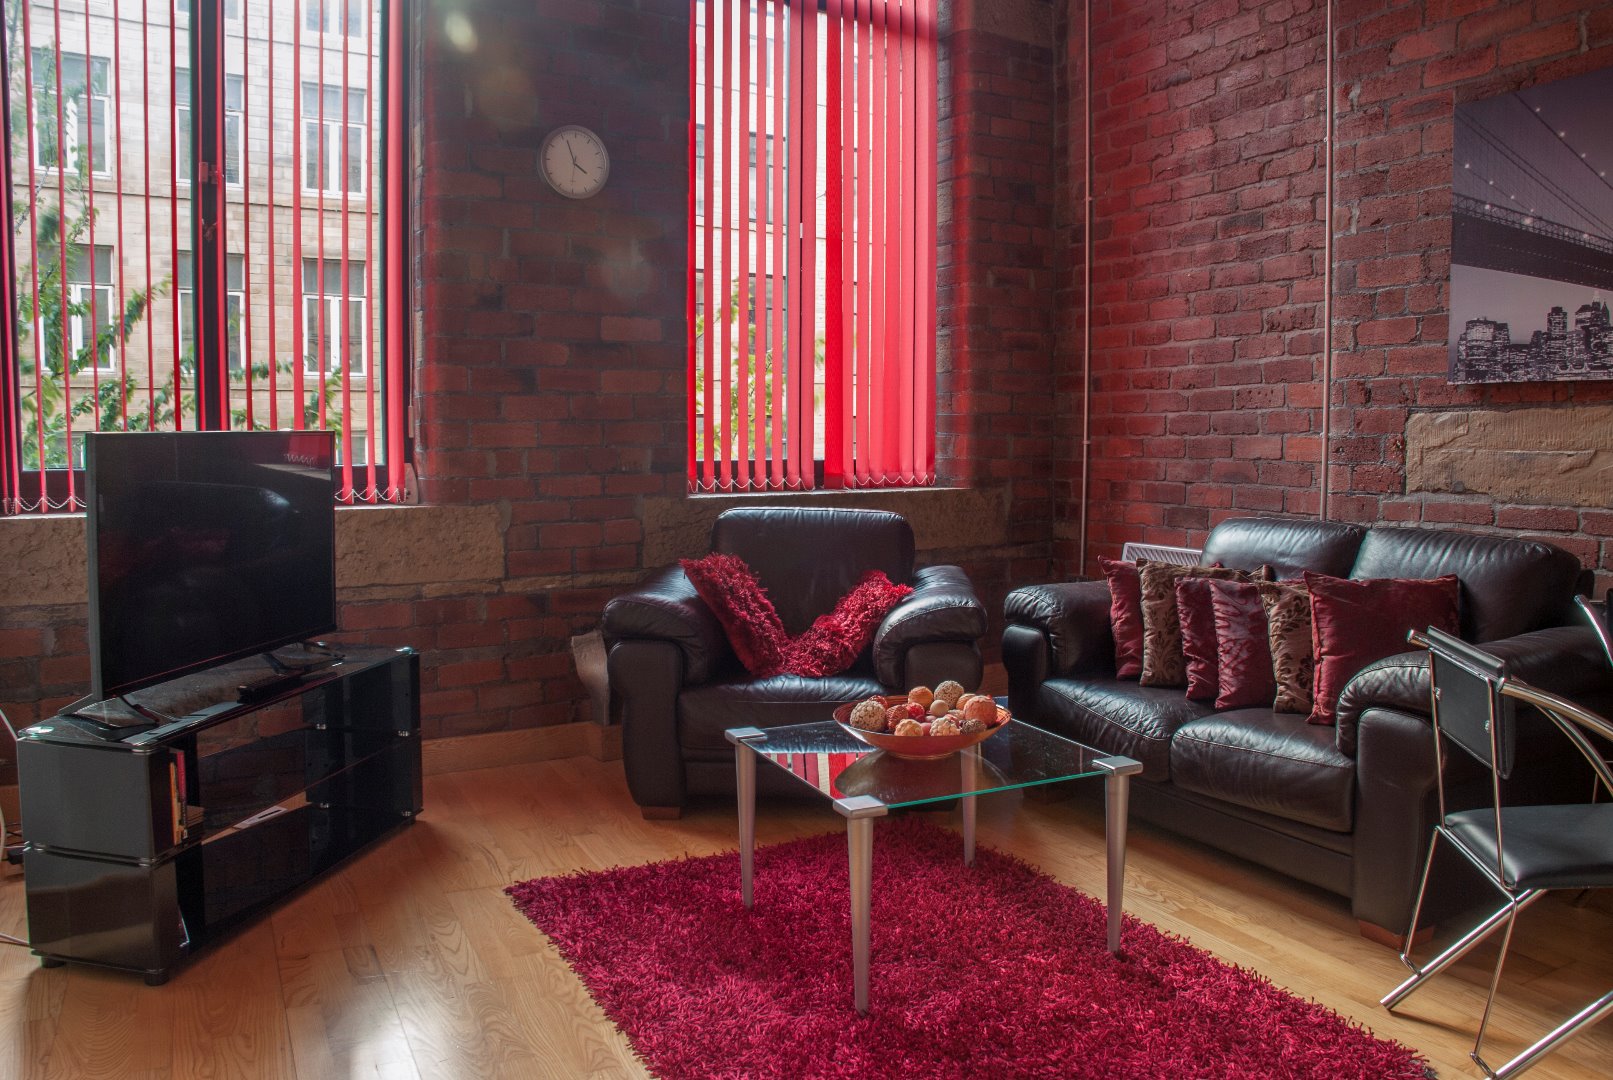 2 bed apartment to rent in Broadgate House - Bradford City Centre - Property Image 1